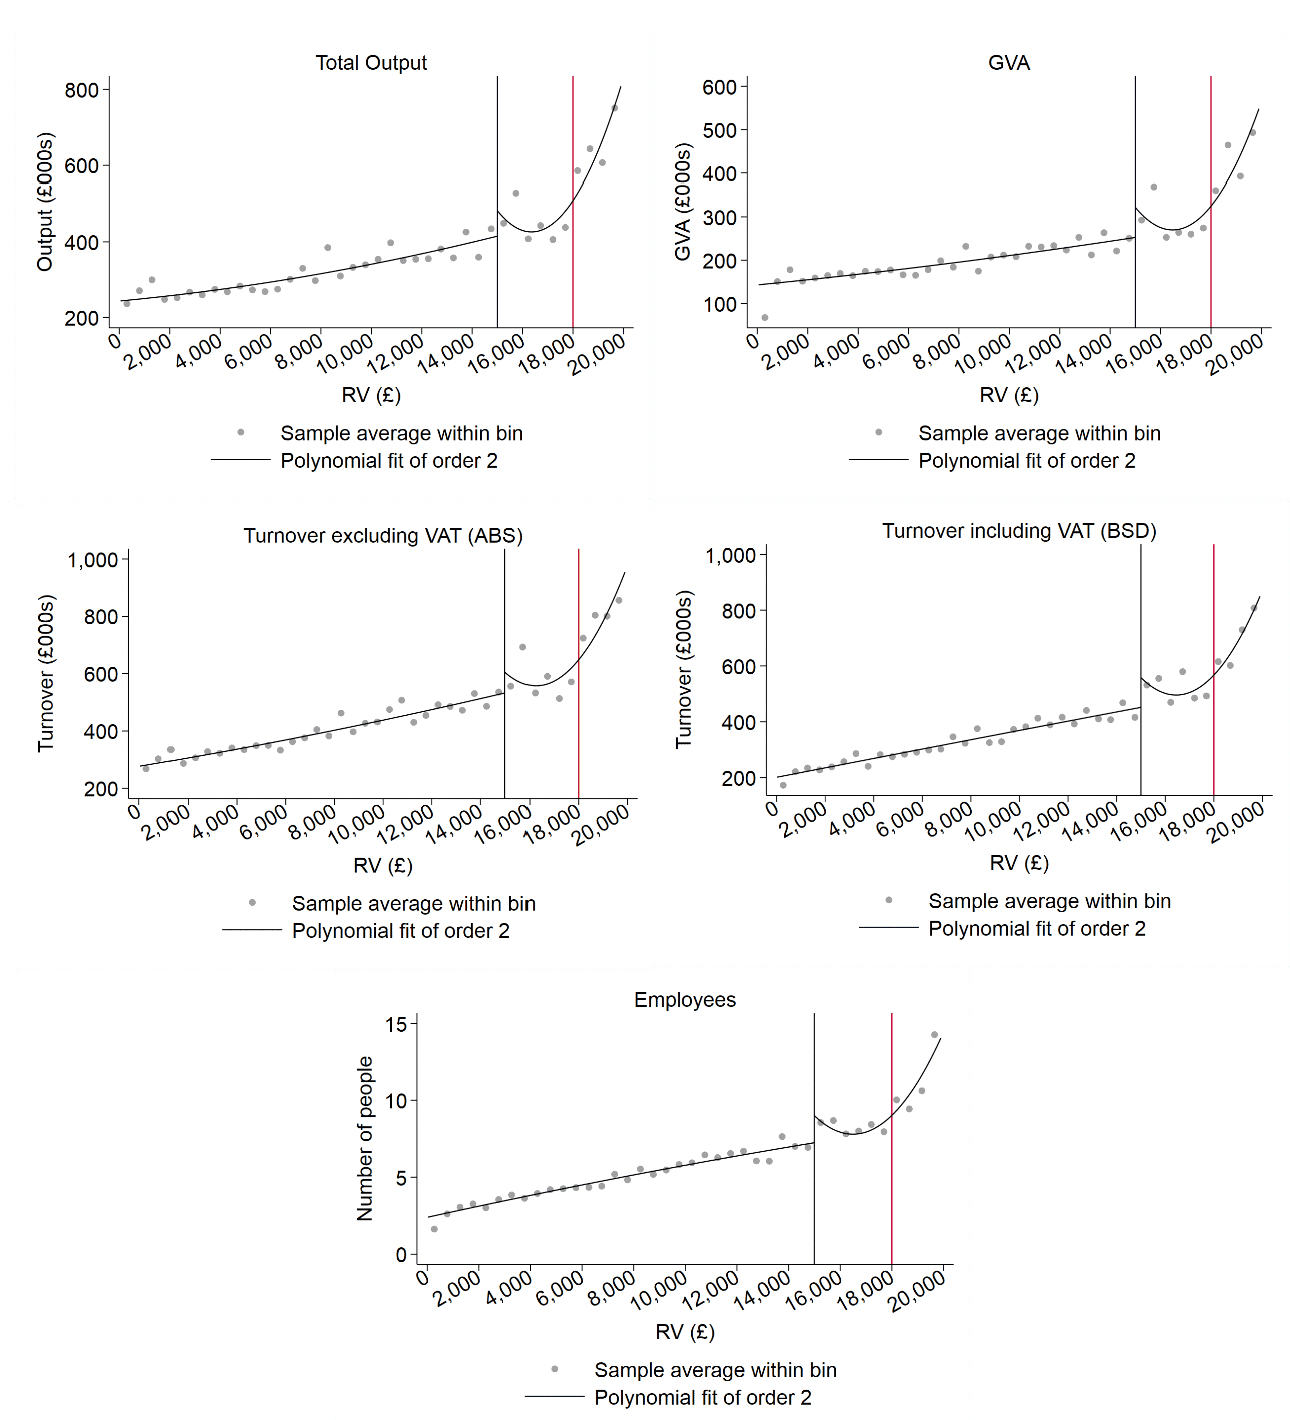 Five panels show the regression discontinuity plots for Total output, GVA, Turnover excluding VAT, Turnover including VAT, and employees, for SBBS claimers with a turnover less than £5 million.  